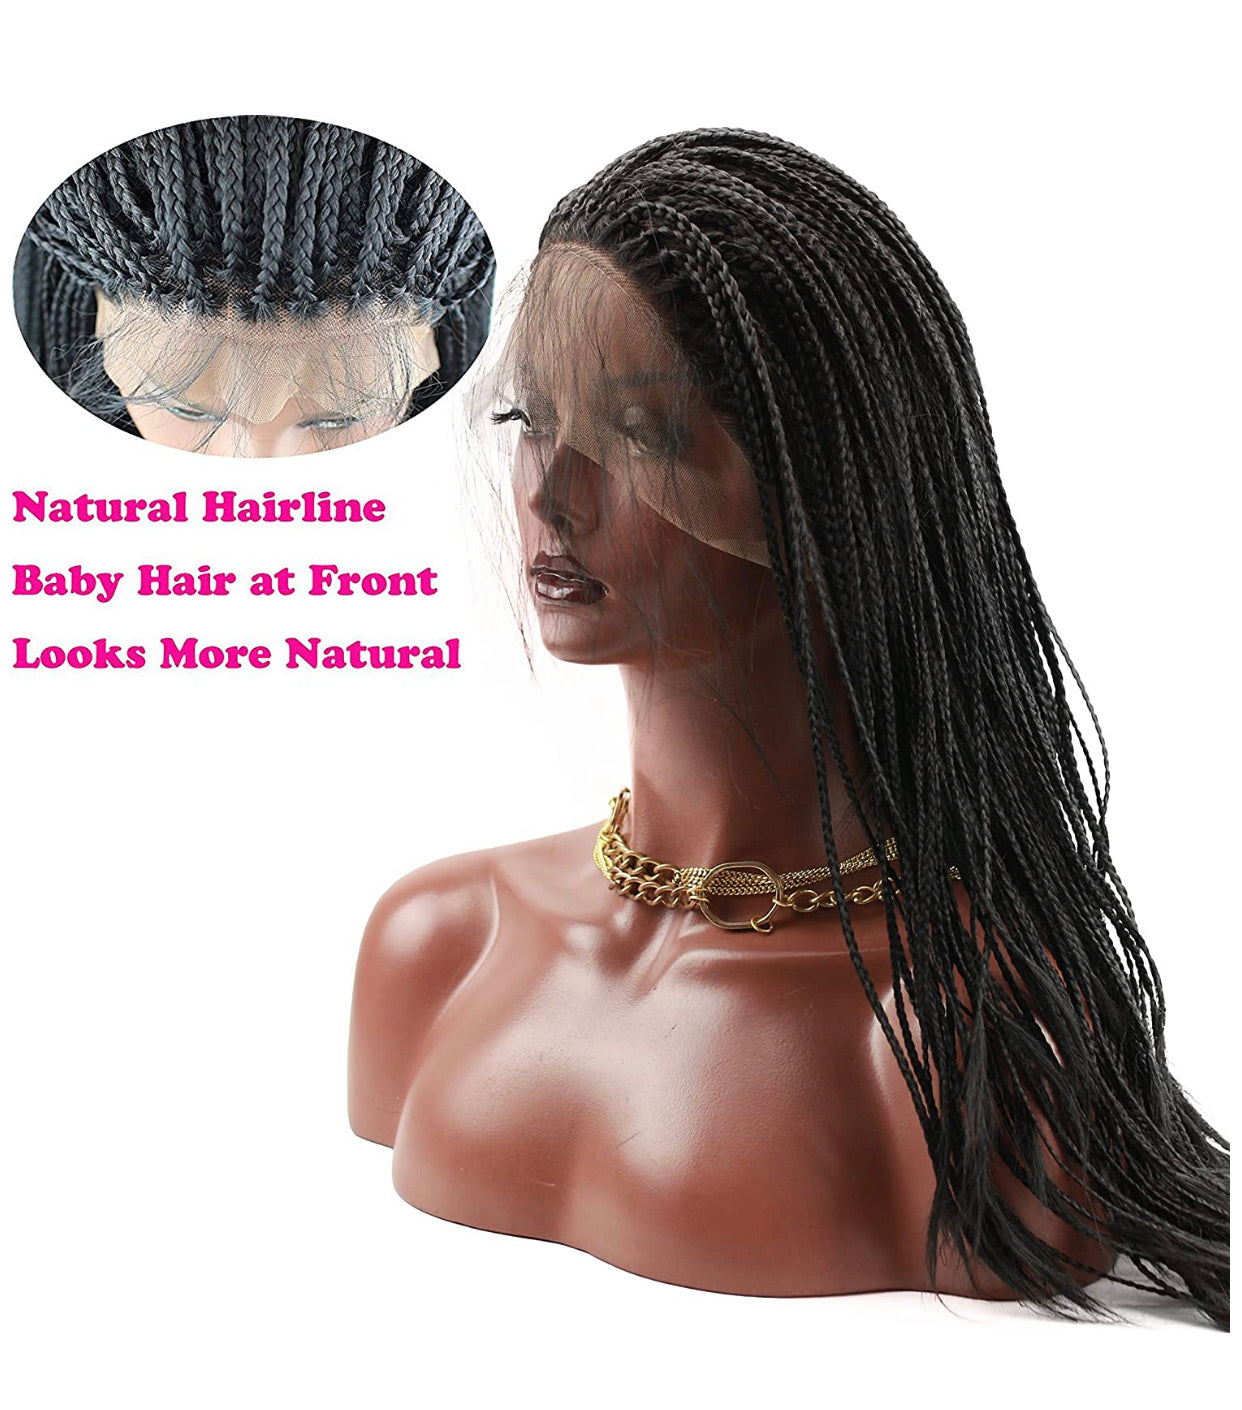 Glueless Micro Braid Extensions Lace Front Specialty Wigs-All That & More Salon Presents up to 50% off- Hope & Hair Breast Cancer Awareness Weekend Event